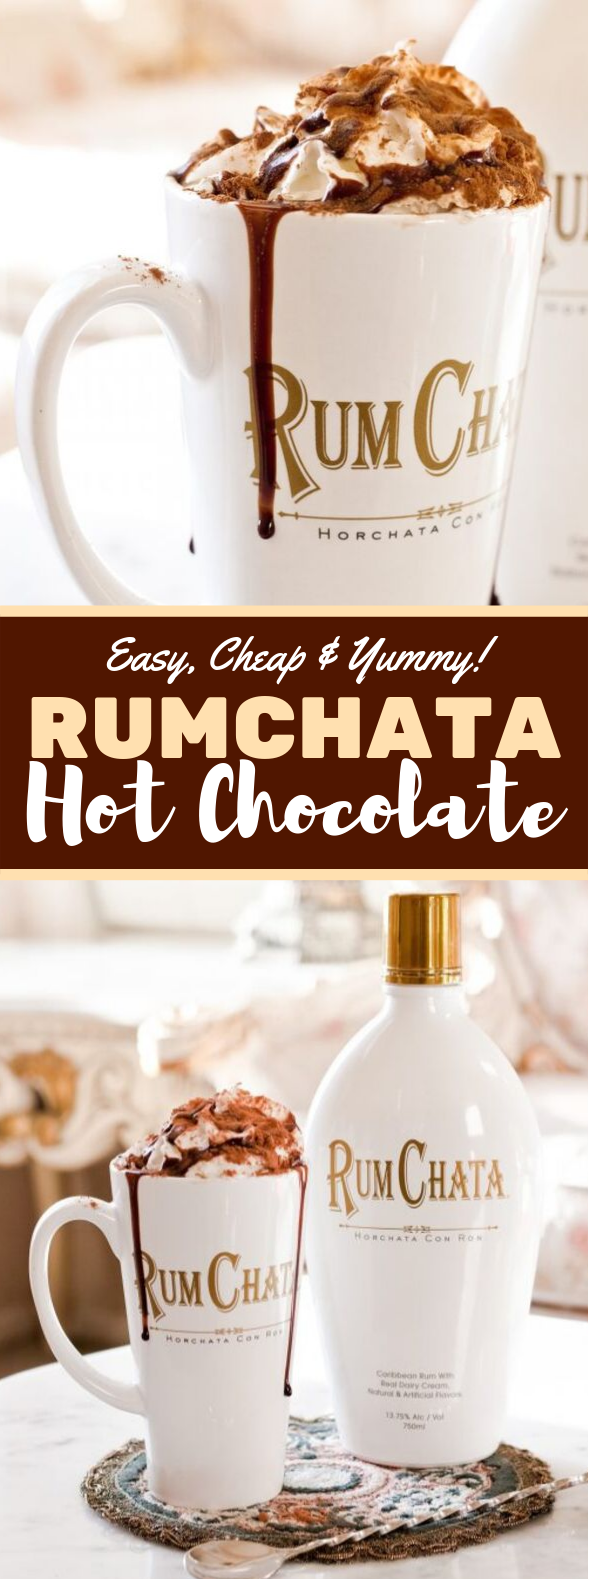 AFFORDABLE ALCOHOL: RUMCHATA ADULT HOT COCOA #drinks #cocktails